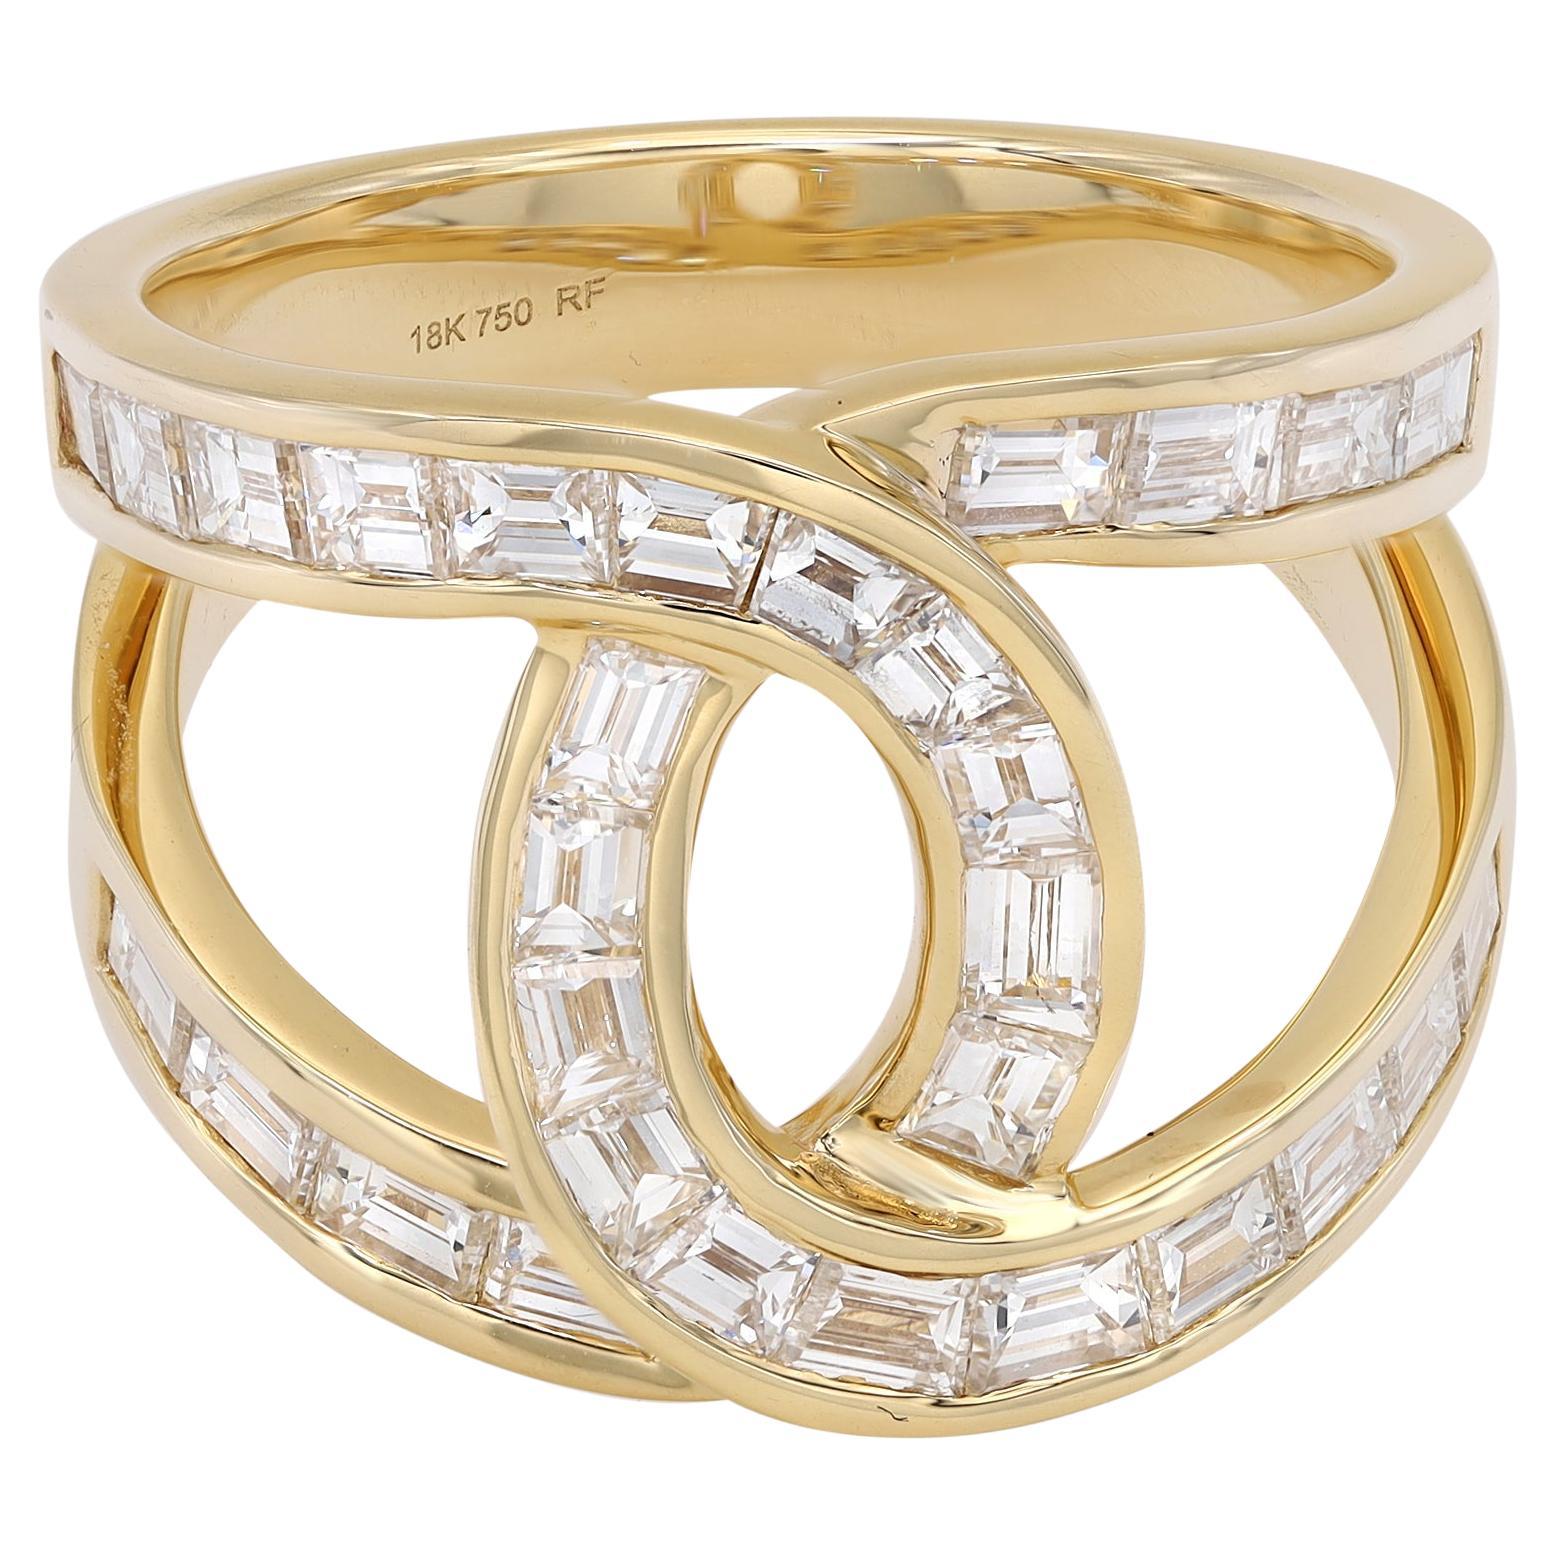 Baguette Cut Diamond Wide Statement Ring 18K Yellow Gold 3.17Cttw For Sale